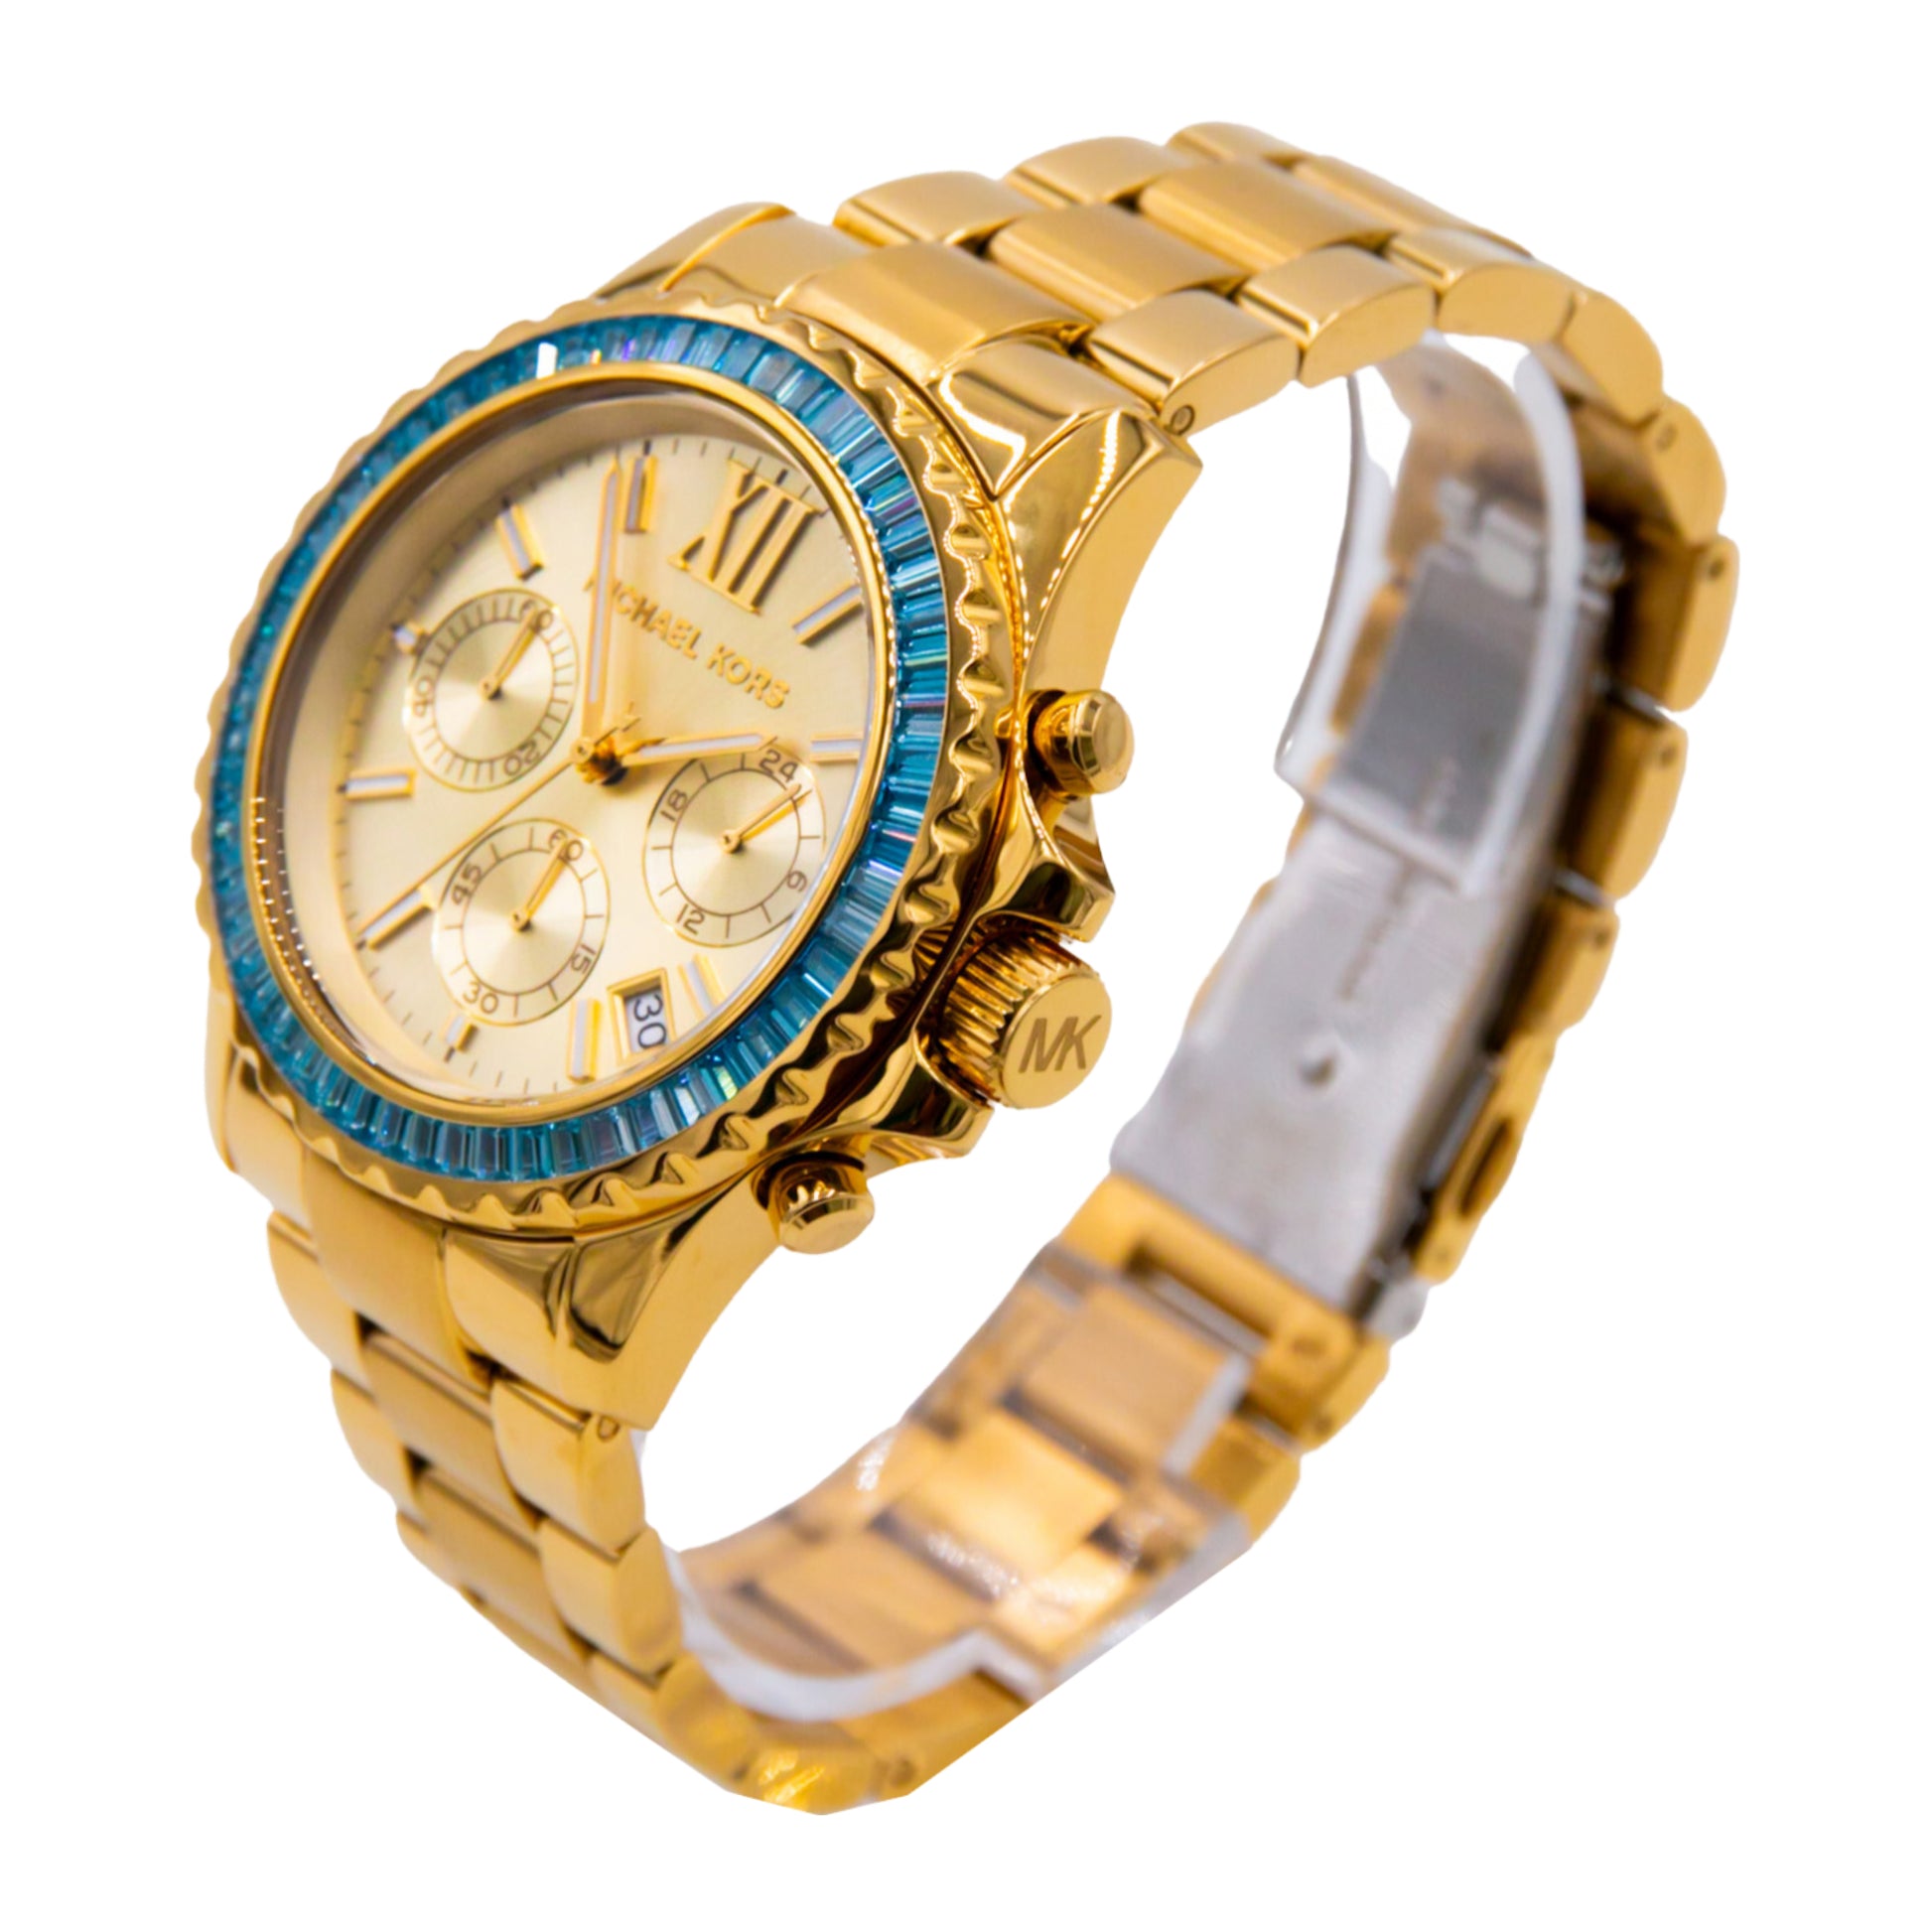 Michael Kors Everest Chronograph Gold-Tone Stainless Steel Watch - MK7210 - 796483562158